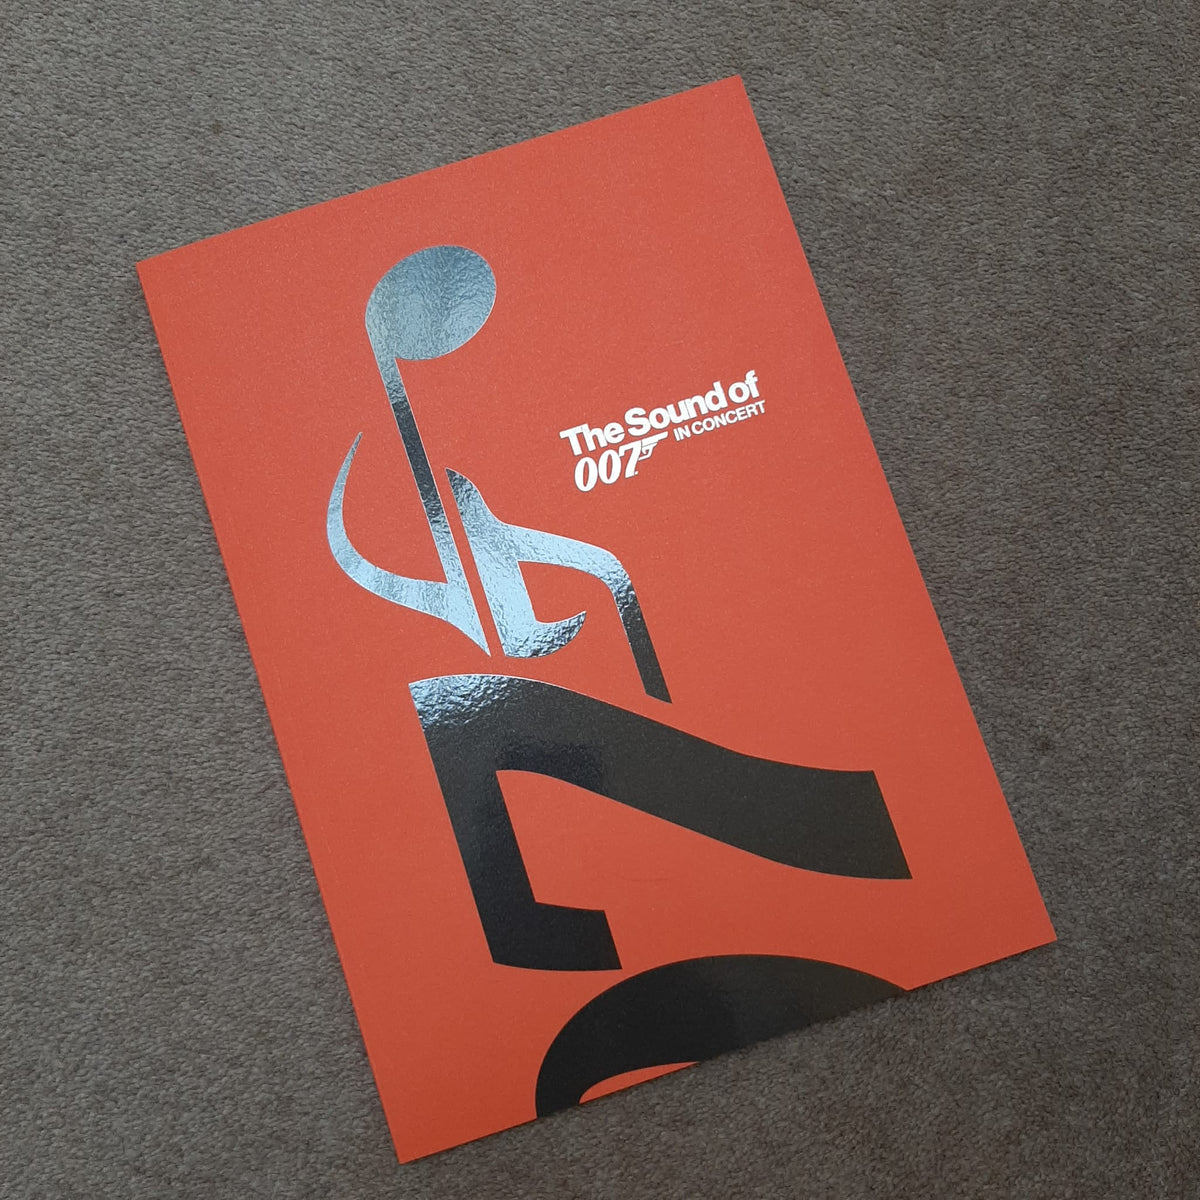 James Bond The Sound of 007 In Concert Official Programme - Limited Edition